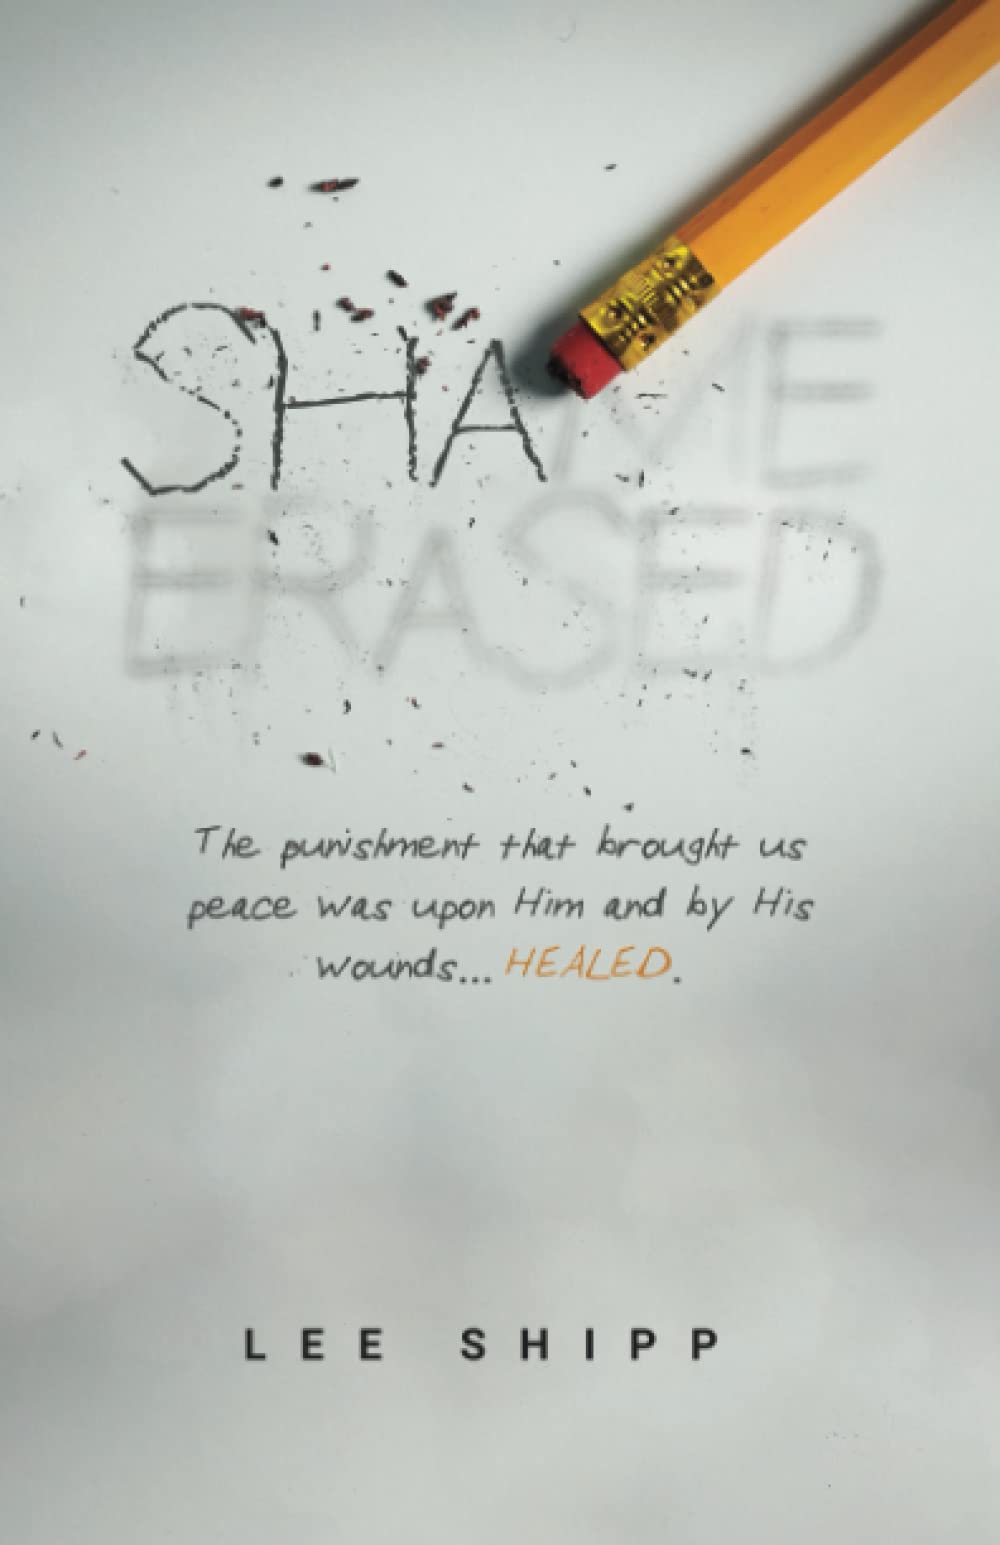 Shame Erased: The punishment that brought us peace was upon Him and by His wounds...HEALED.